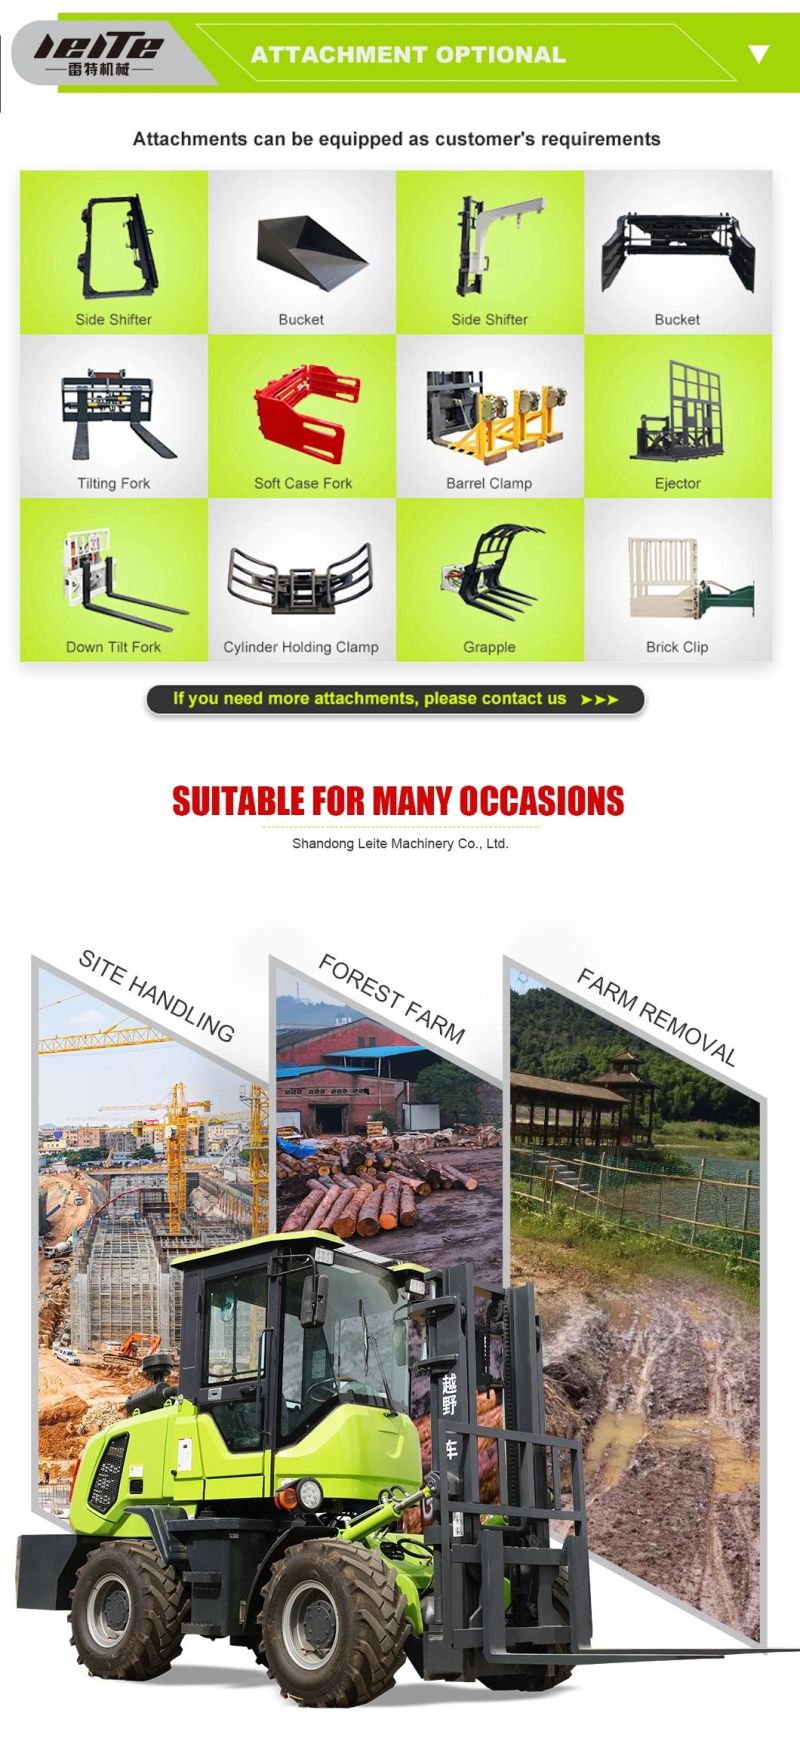 Widely Used Superior Quality 3 5 Ton Diesel Cross-Country Lift Loading and Unloading Forklift Truck Forklifts for Sale